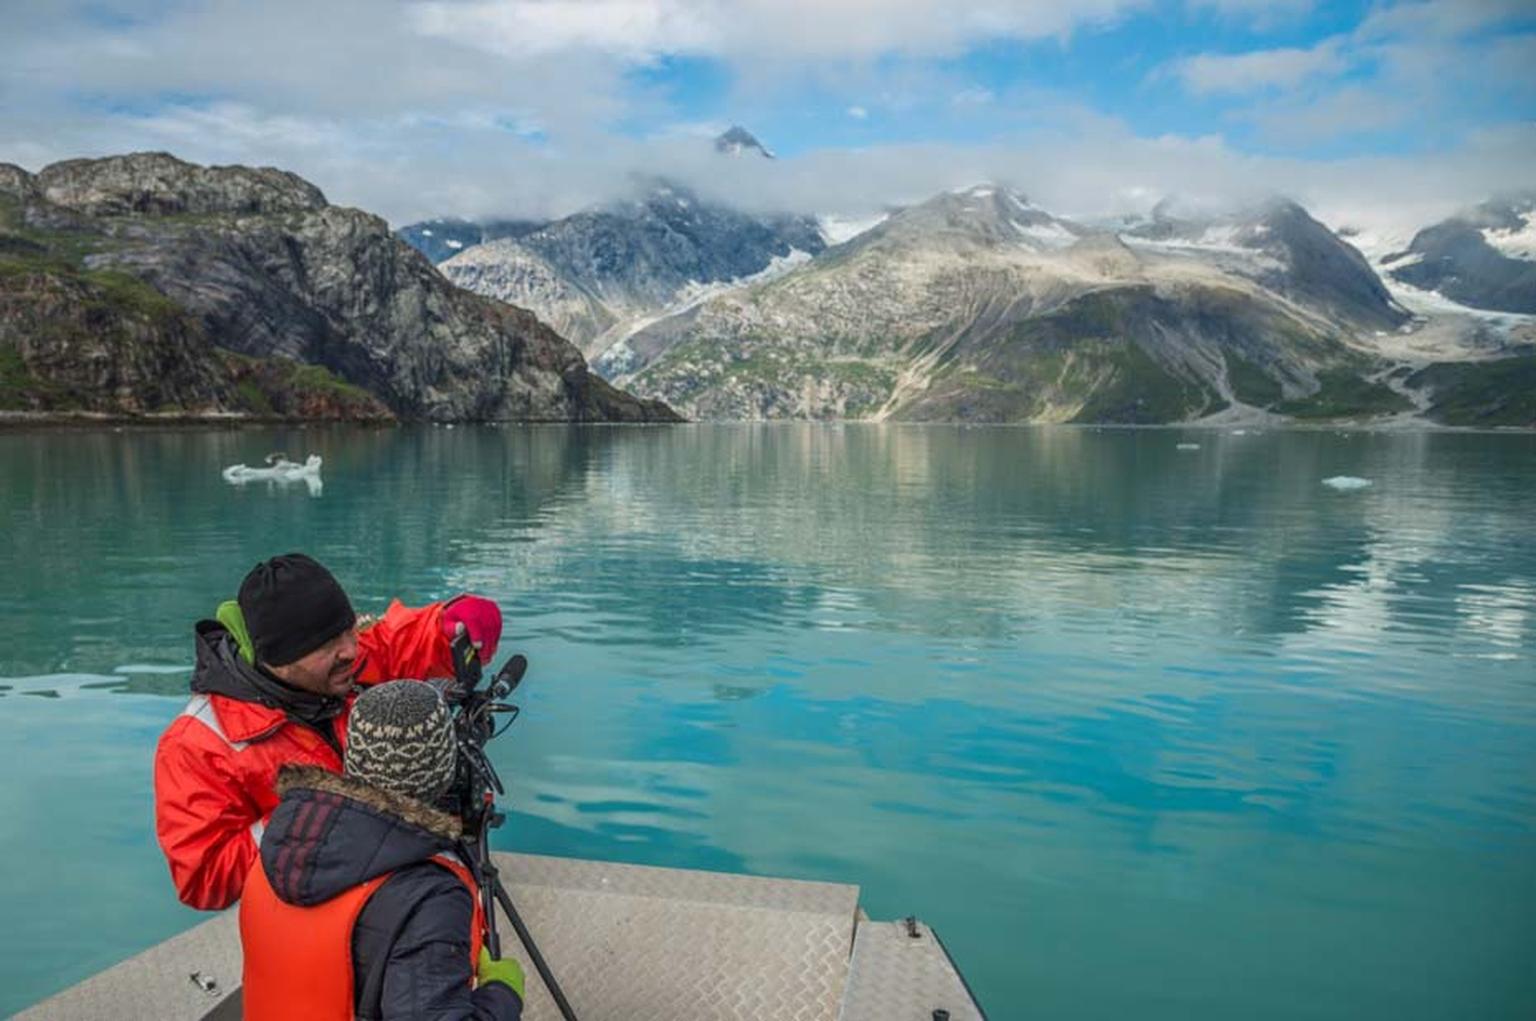 Alaskan photographer and modern explorer Mark Kelley, who has spent more than 200 days in Glacier Bay National Park, recently joined Jaeger-LeCoultre and UNESCO on location, wearing  the Geophysic 1958 watch, to capture the unique ecosystem of the region 